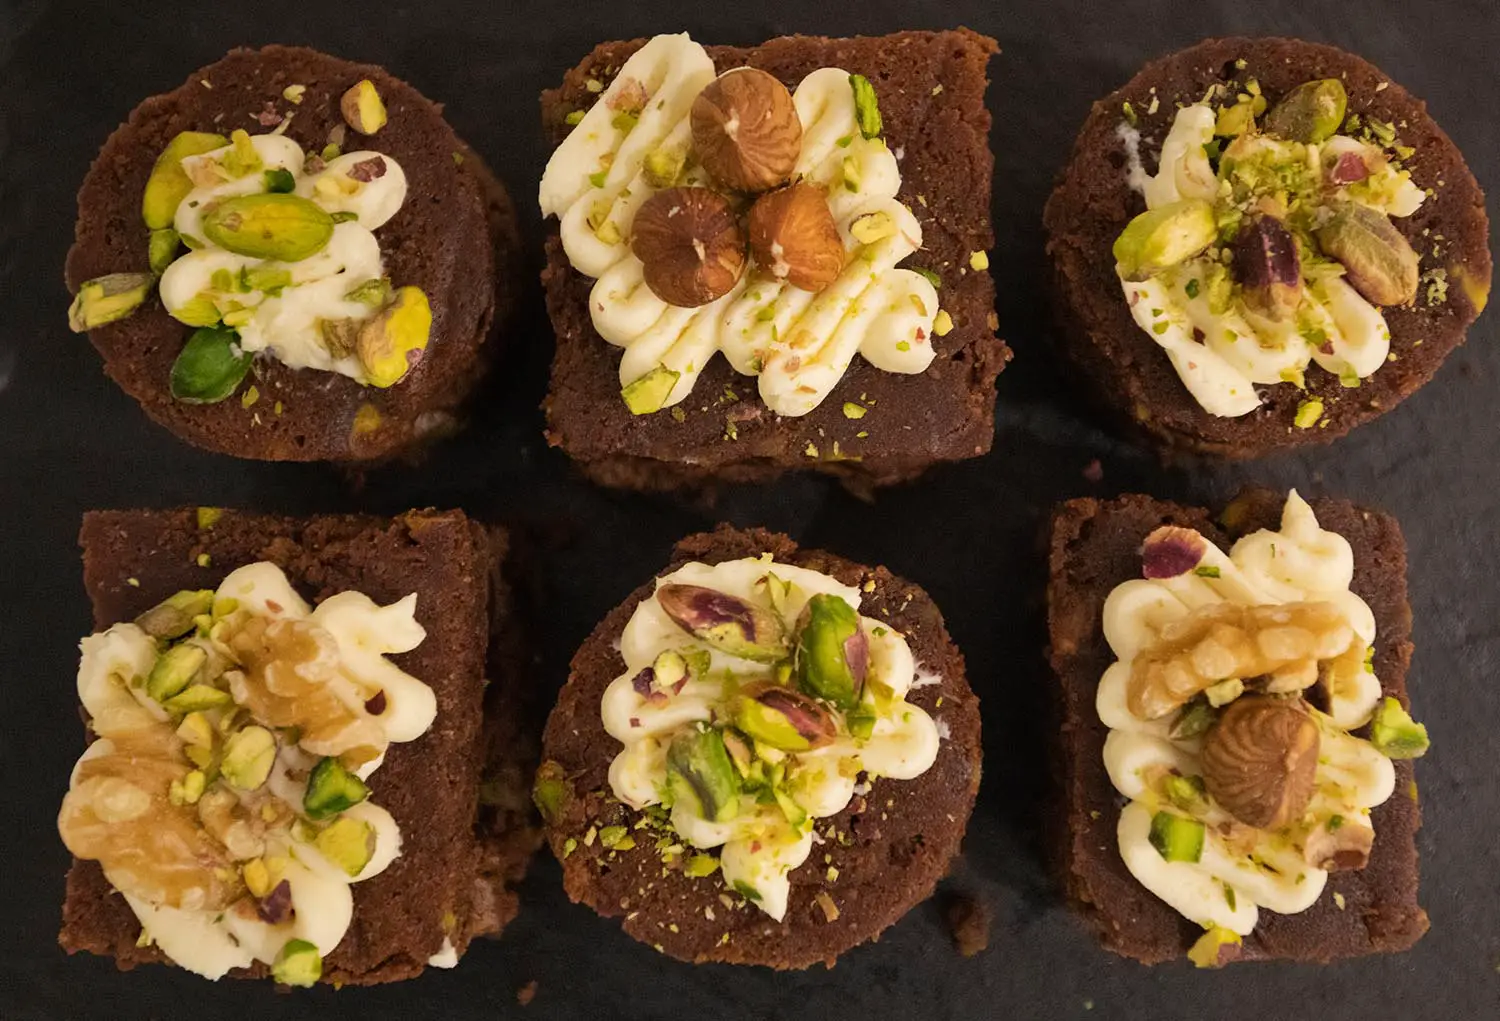 SUPER TASTY BROWNIES WITH A PINCH OF INDIVIDUALITY – RECIPE